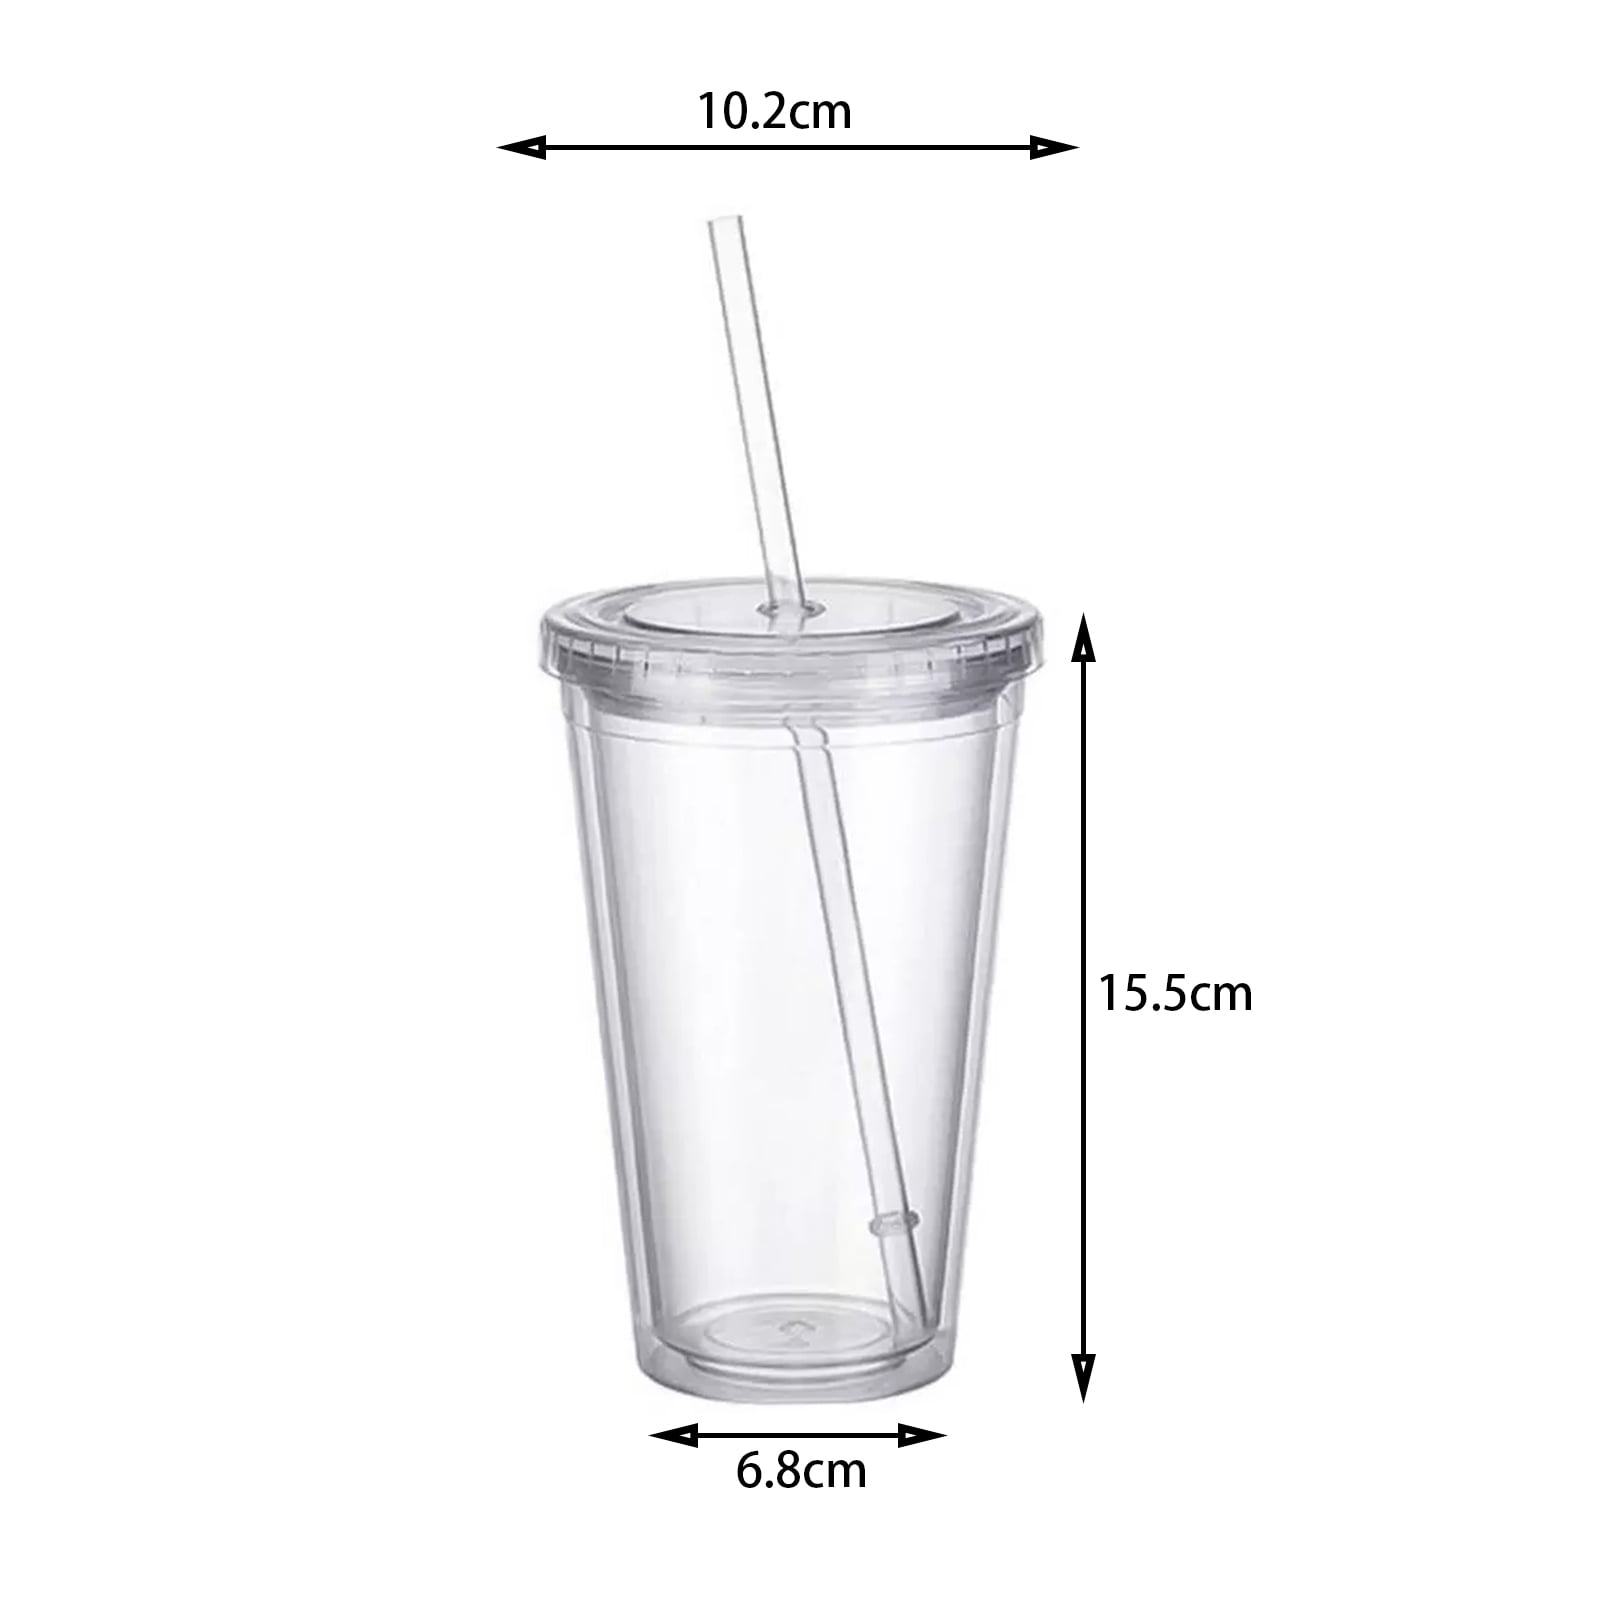 500ml Drinks Cup With Straw, Stainless Steel Travel Mug Coffee Cups With  Lid And Straw Drinking Cups…See more 500ml Drinks Cup With Straw, Stainless